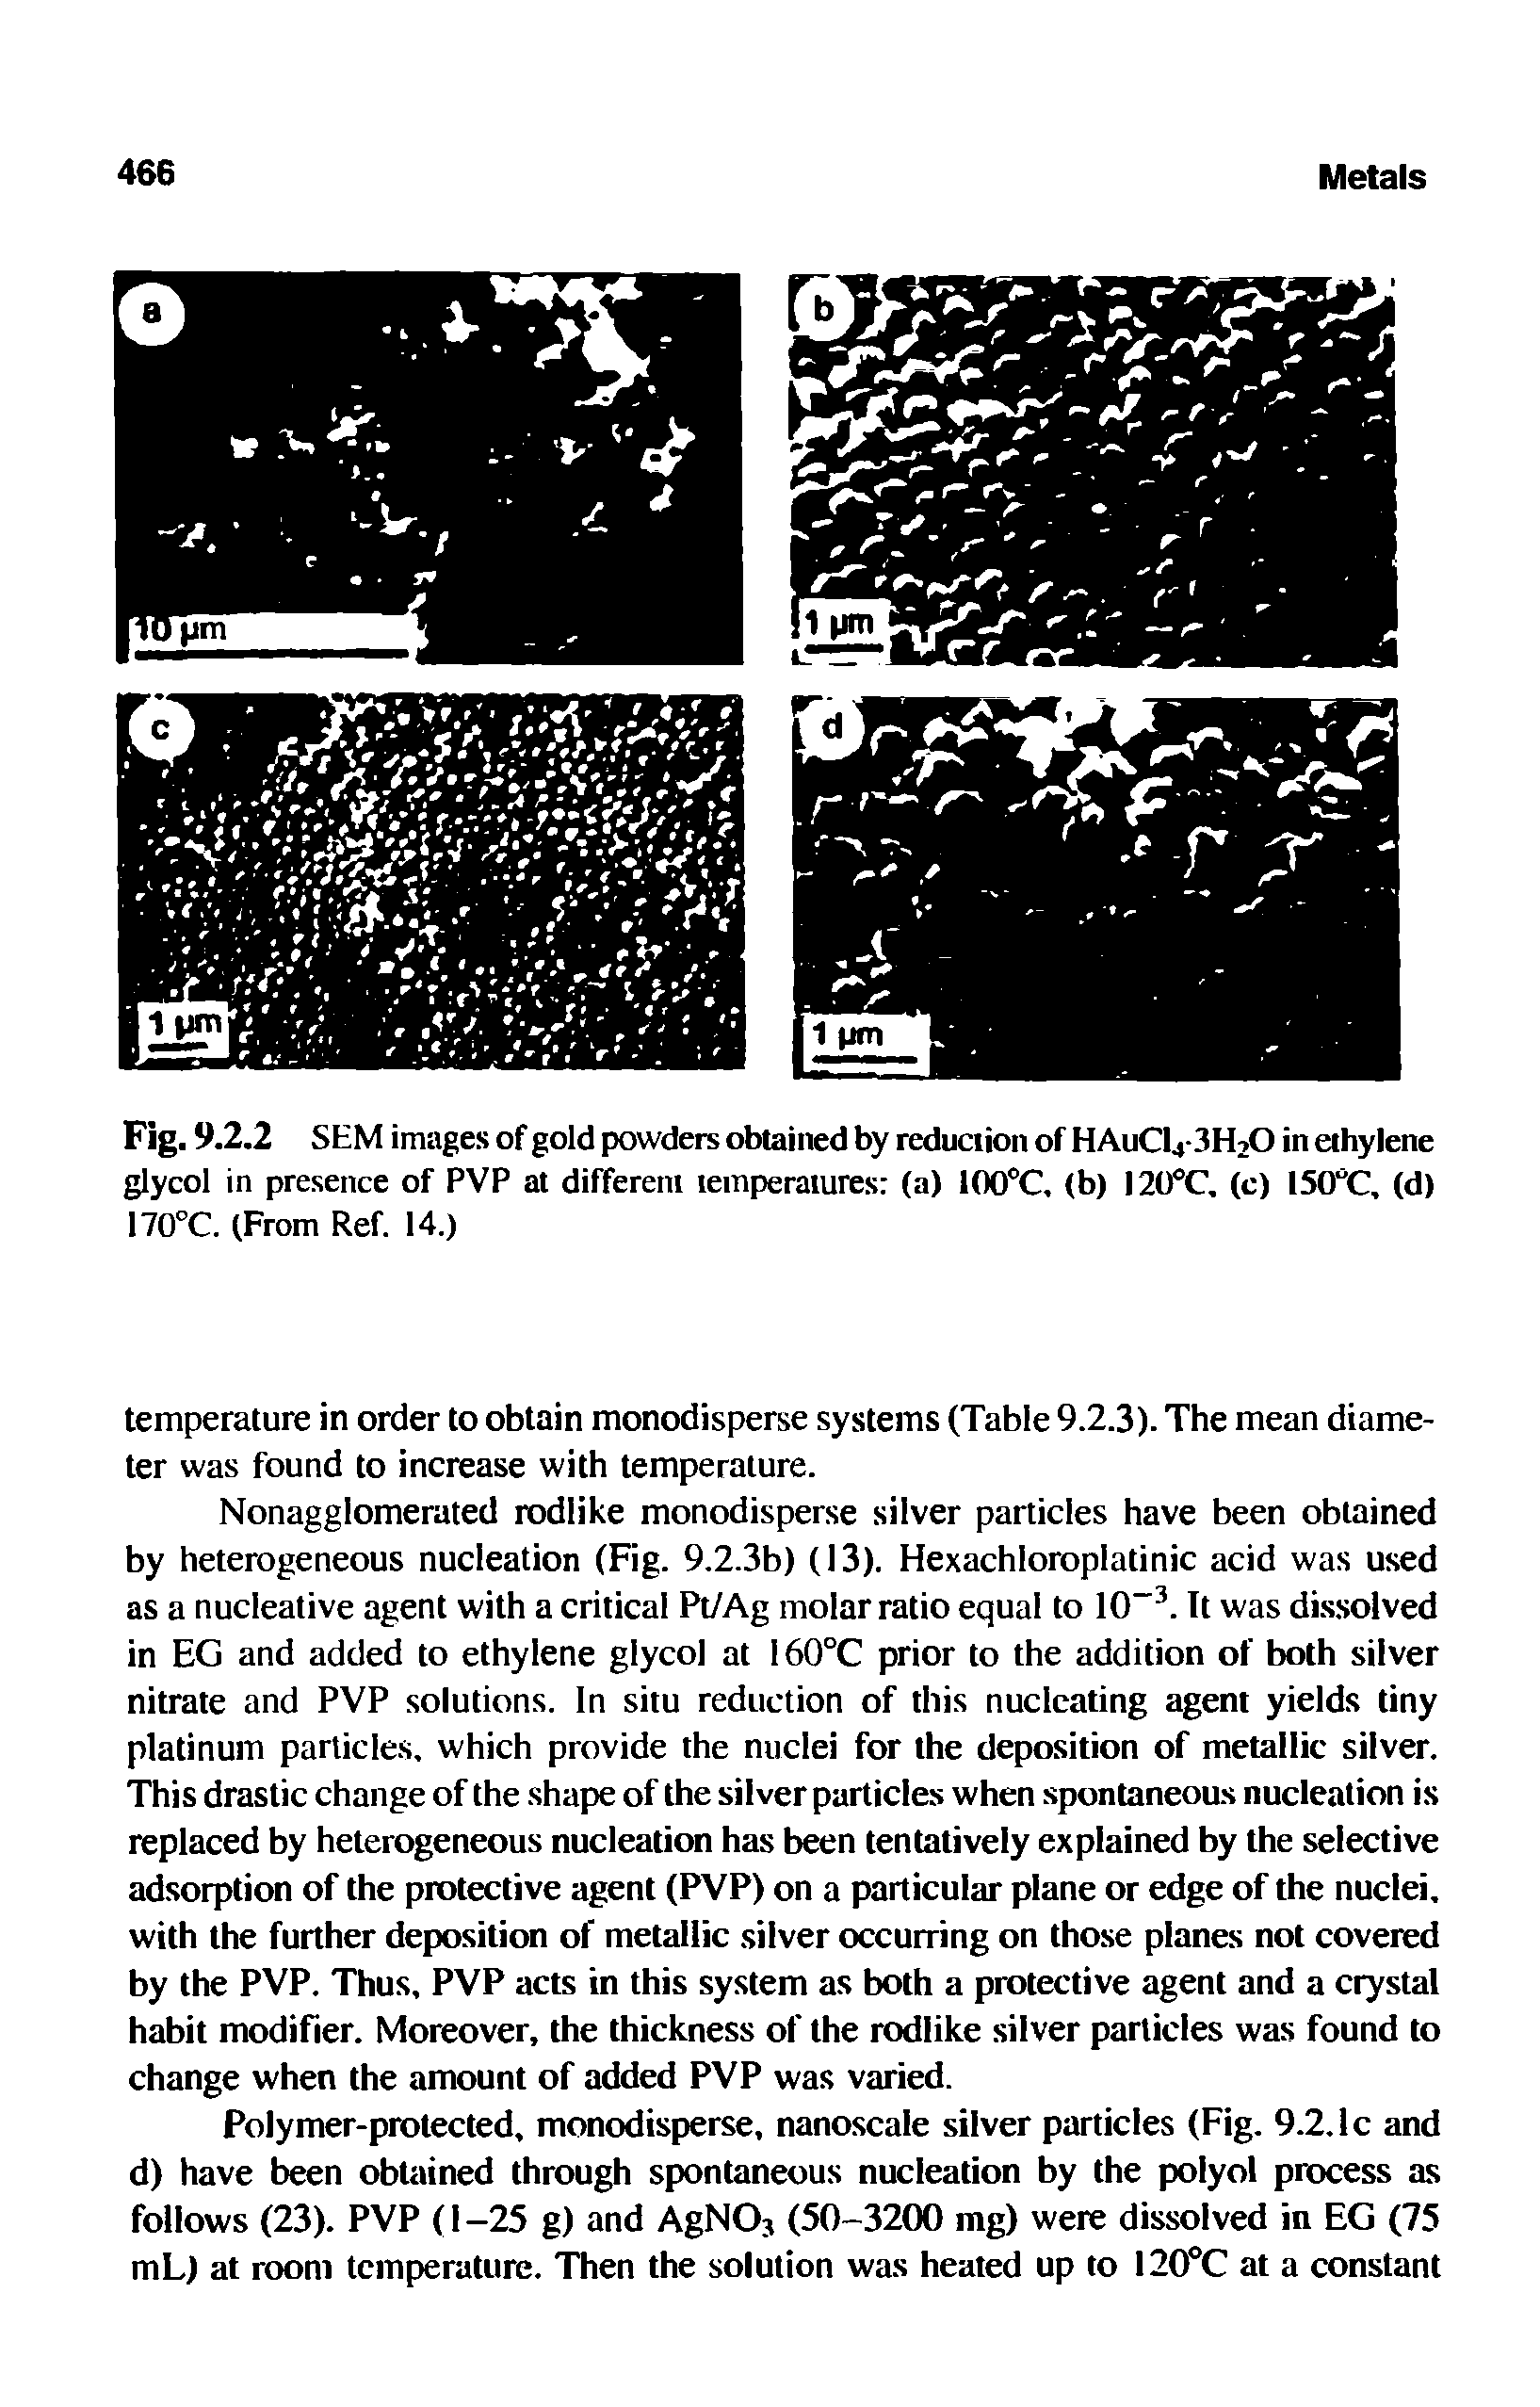 Fig. 9.2.2 SEM images of gold powders obtained by reduction of HAuCI4-3H20 in ethylene glycol in presence of PVP at different temperatures (a) 100°C, (b) I20°C. (c) 150"C, (d) 170°C. (From Ref. 14.)...